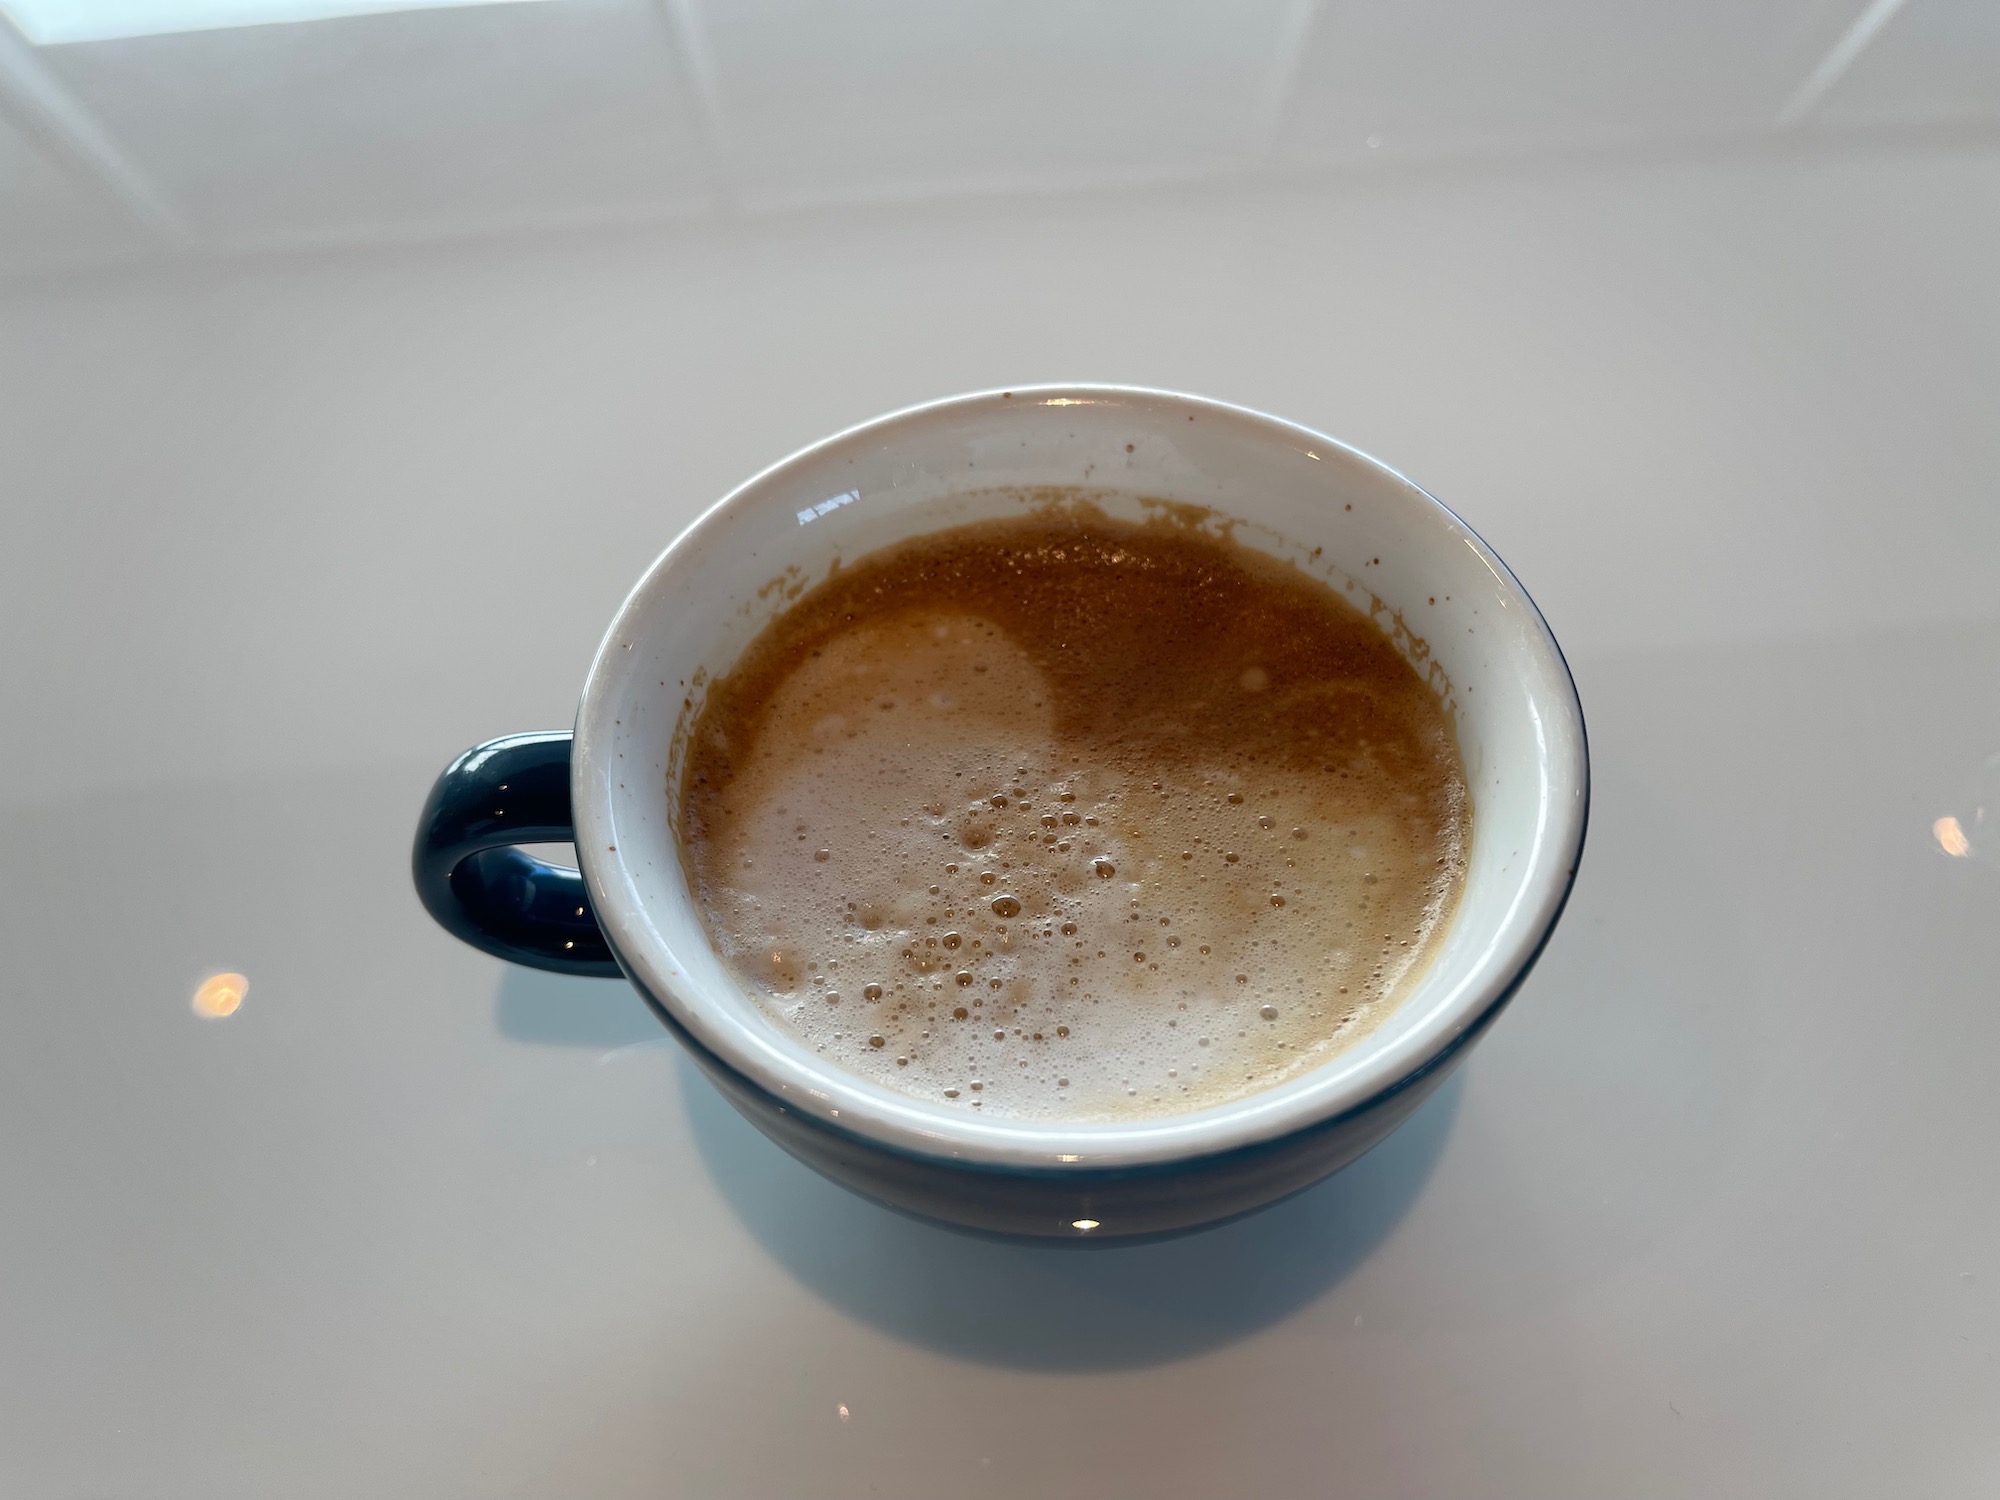 a cup of coffee on a white surface